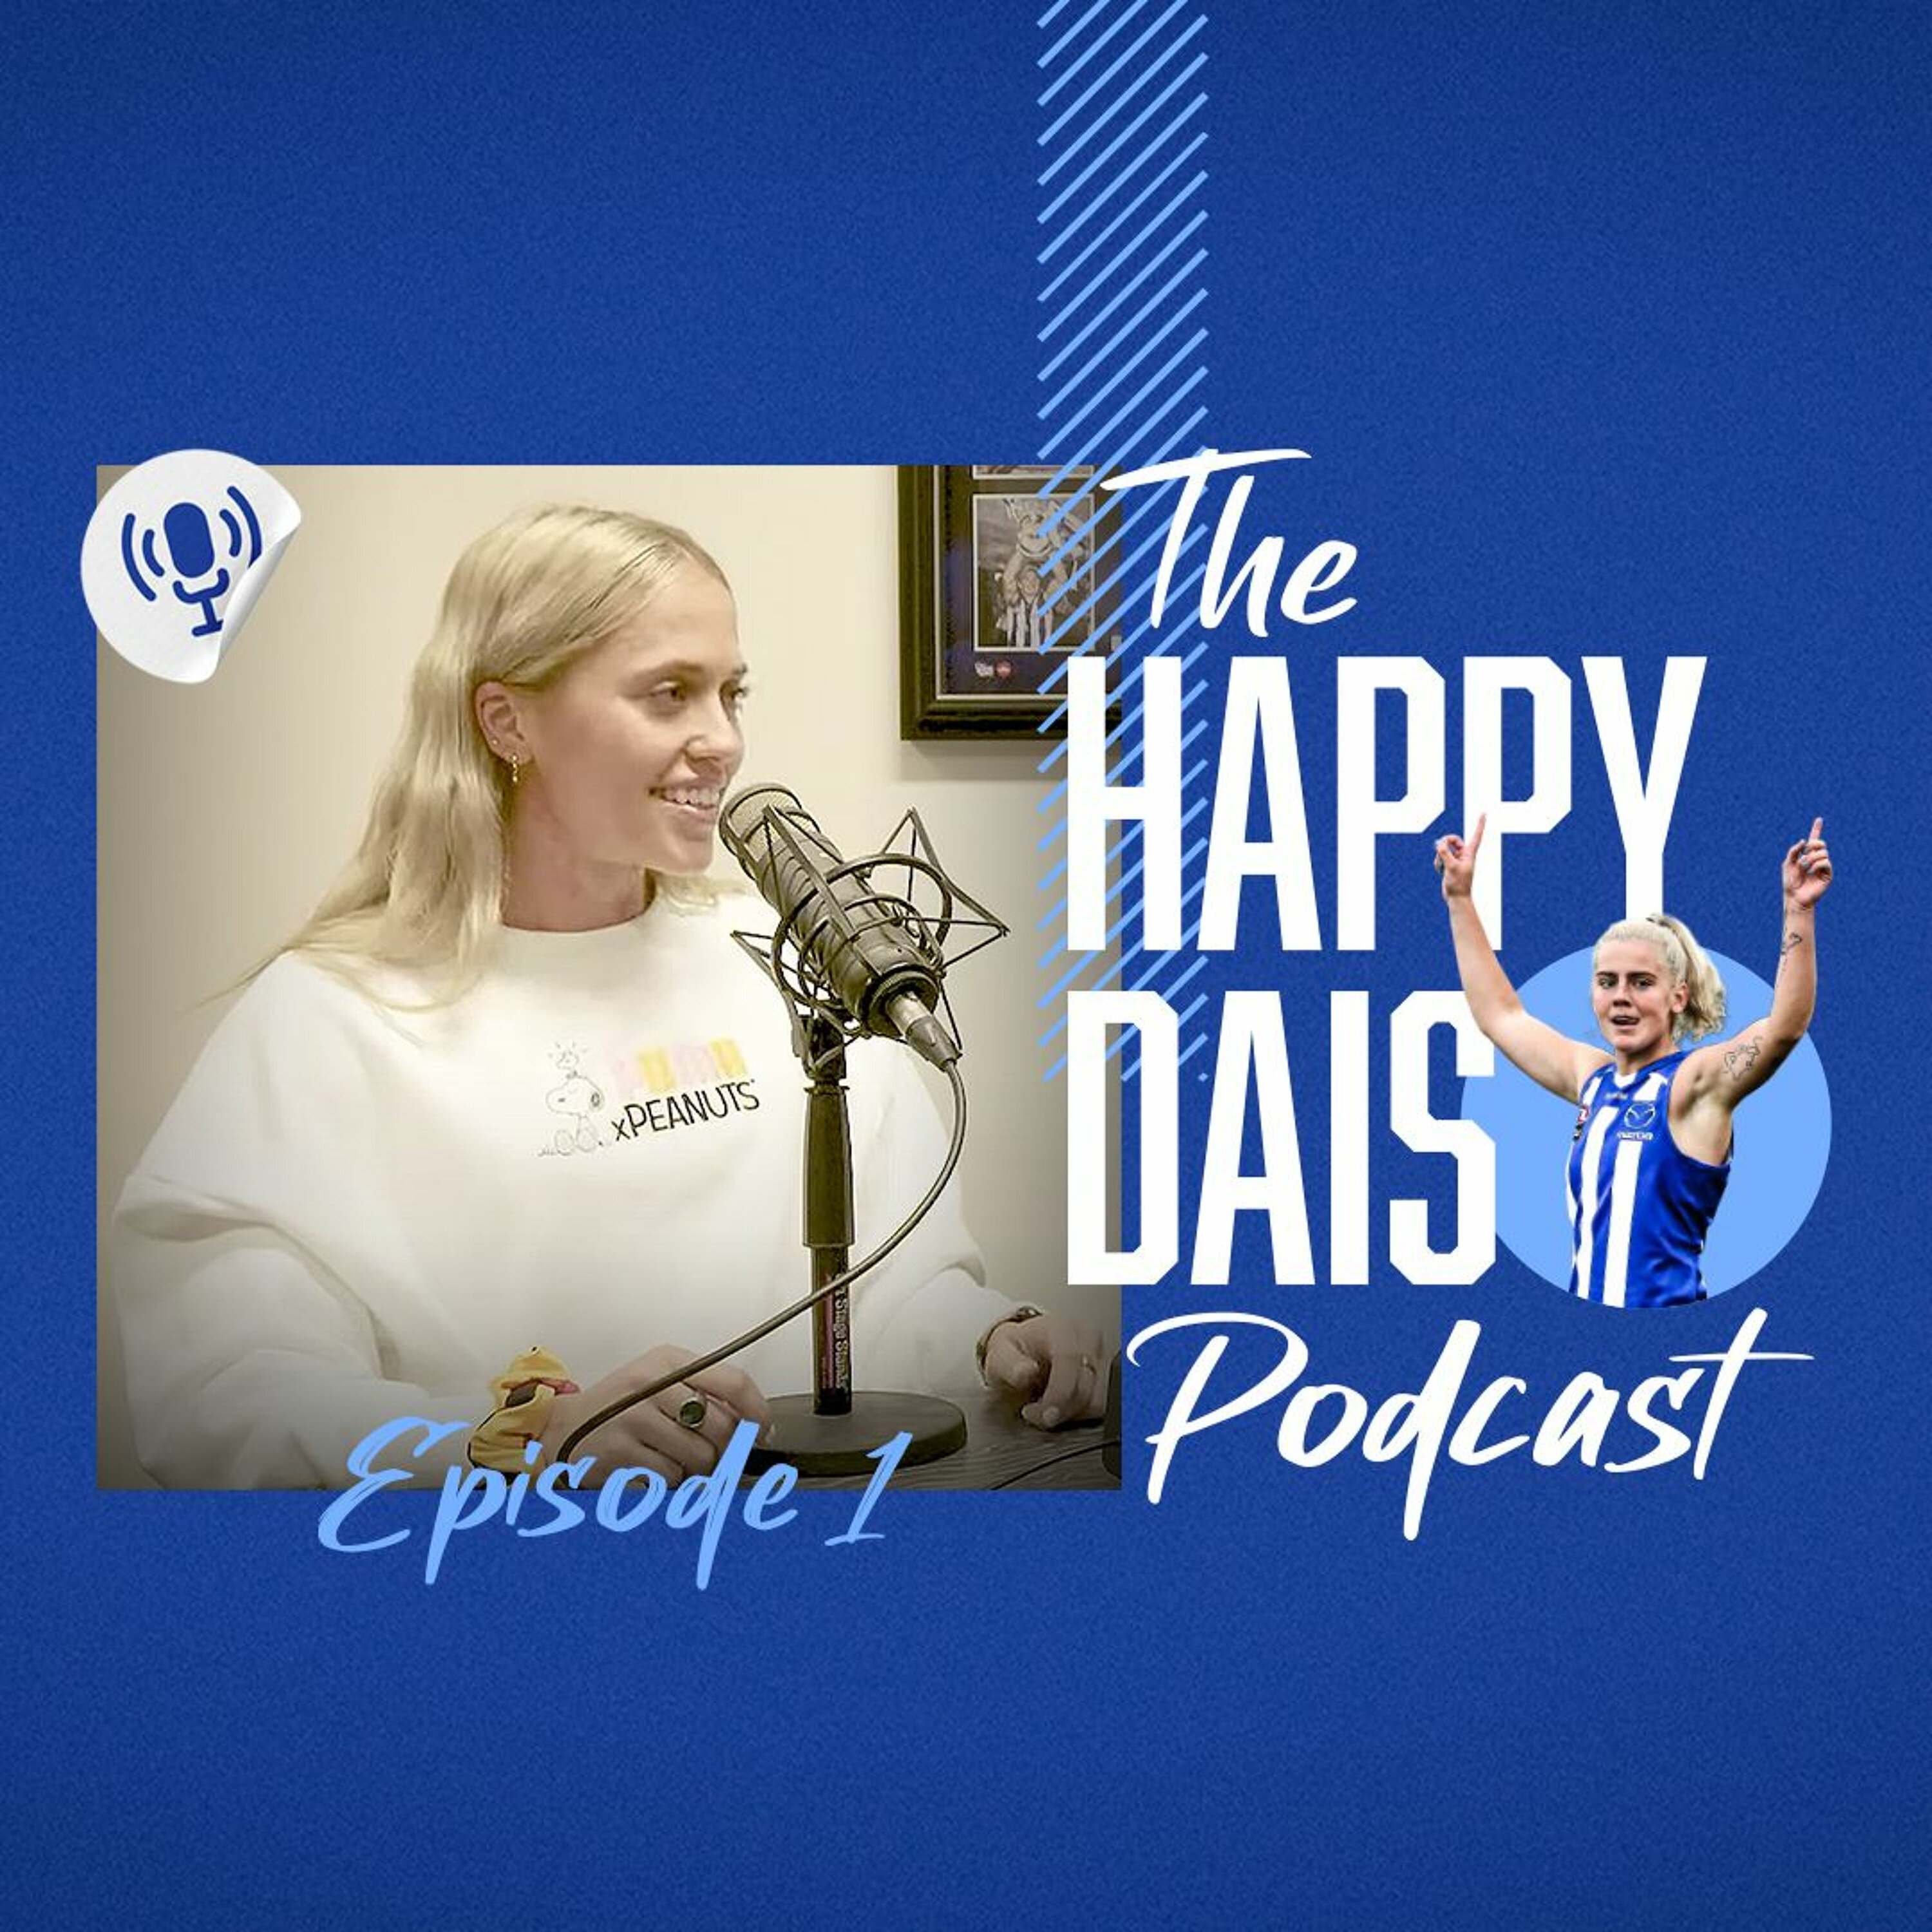 Kaitlyn Ashmore and Daisy Bateman (Episode 1 - ‘Happy Dais’ Podcast)